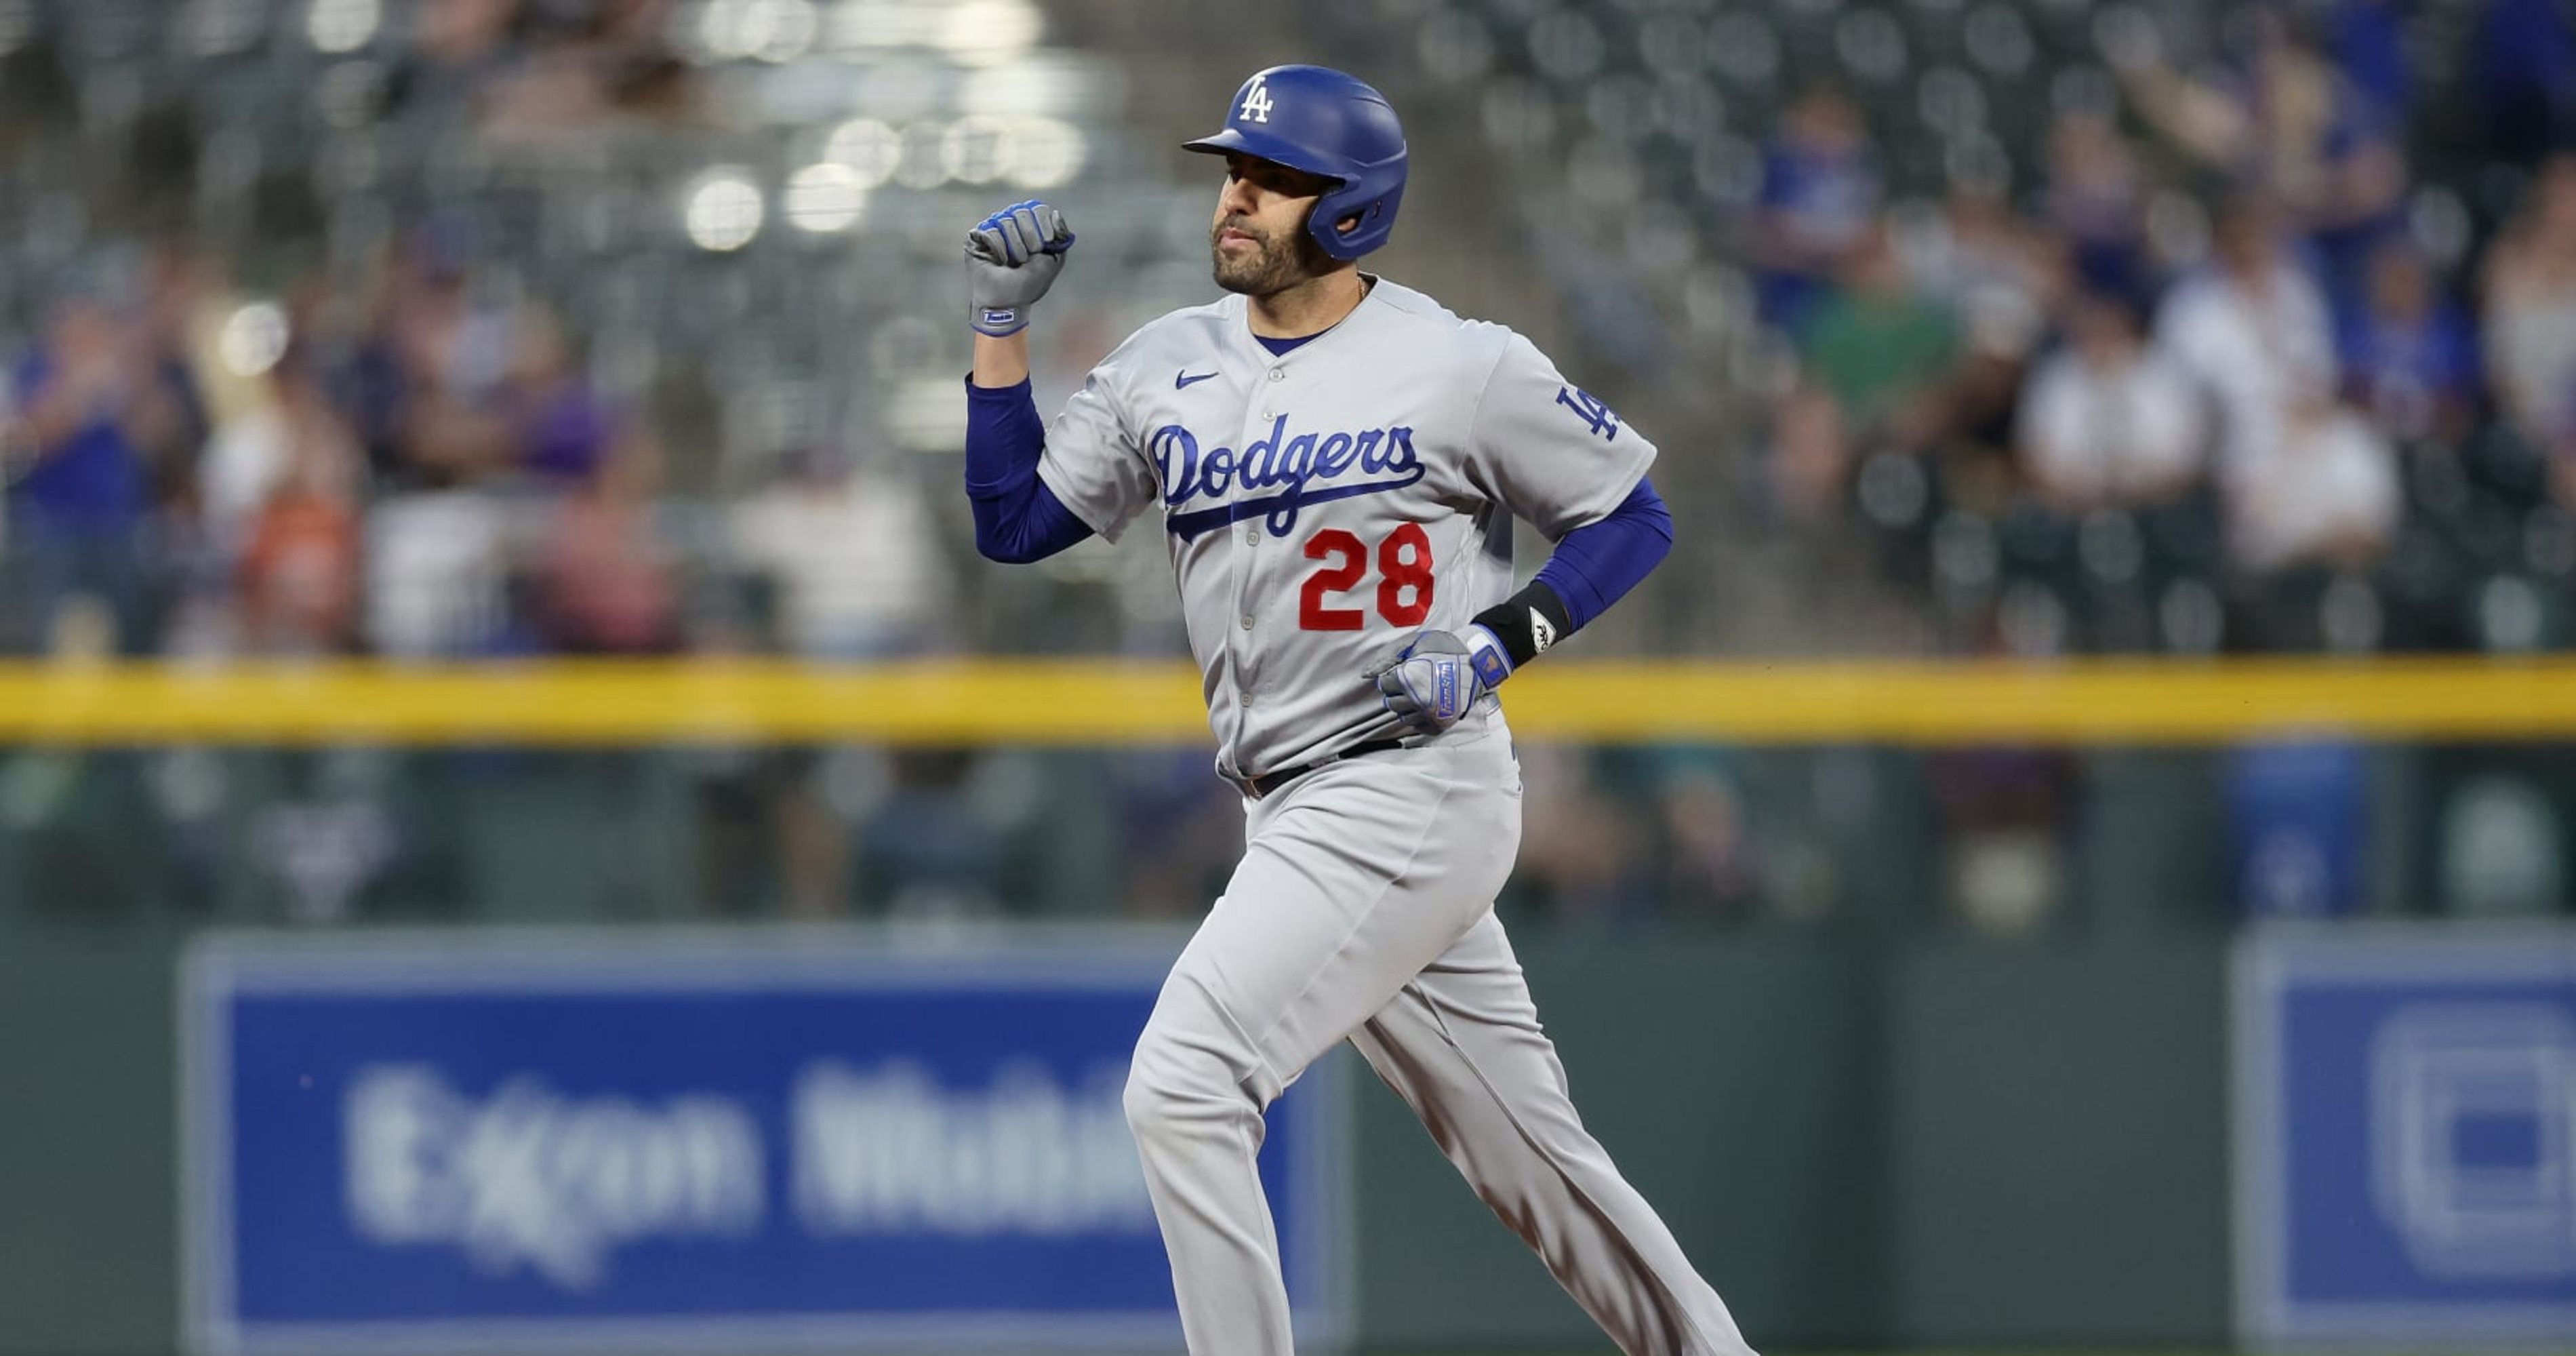 MLB Rumors: J.D. Martinez, Mets Agree to 1-Year, $12M Contract amid Angels Buzz